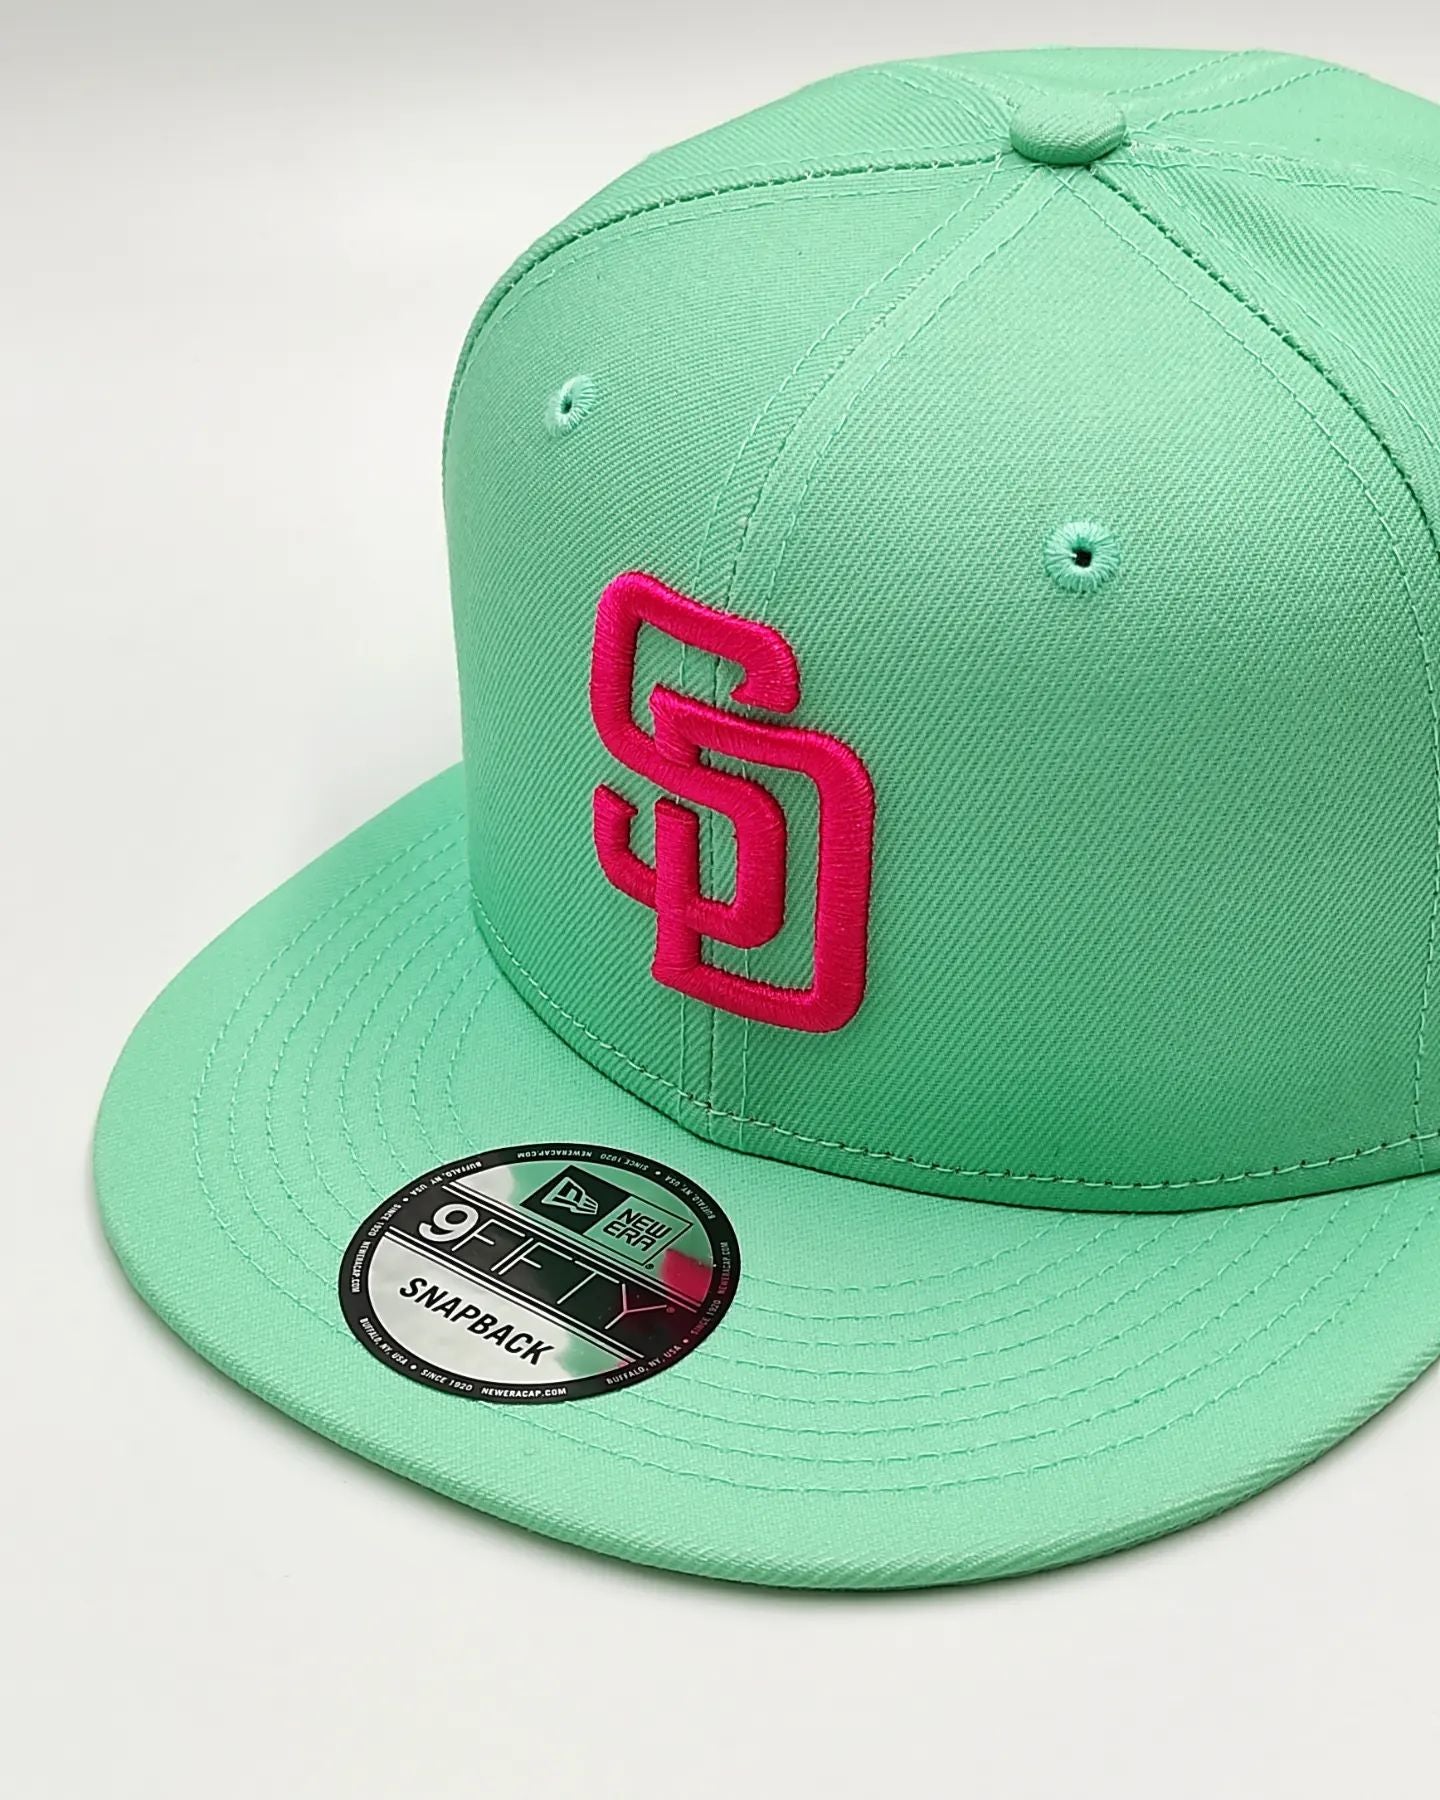 San Diego Padres MLB21 City Connect Mint/Pink Fitted - New Era cap